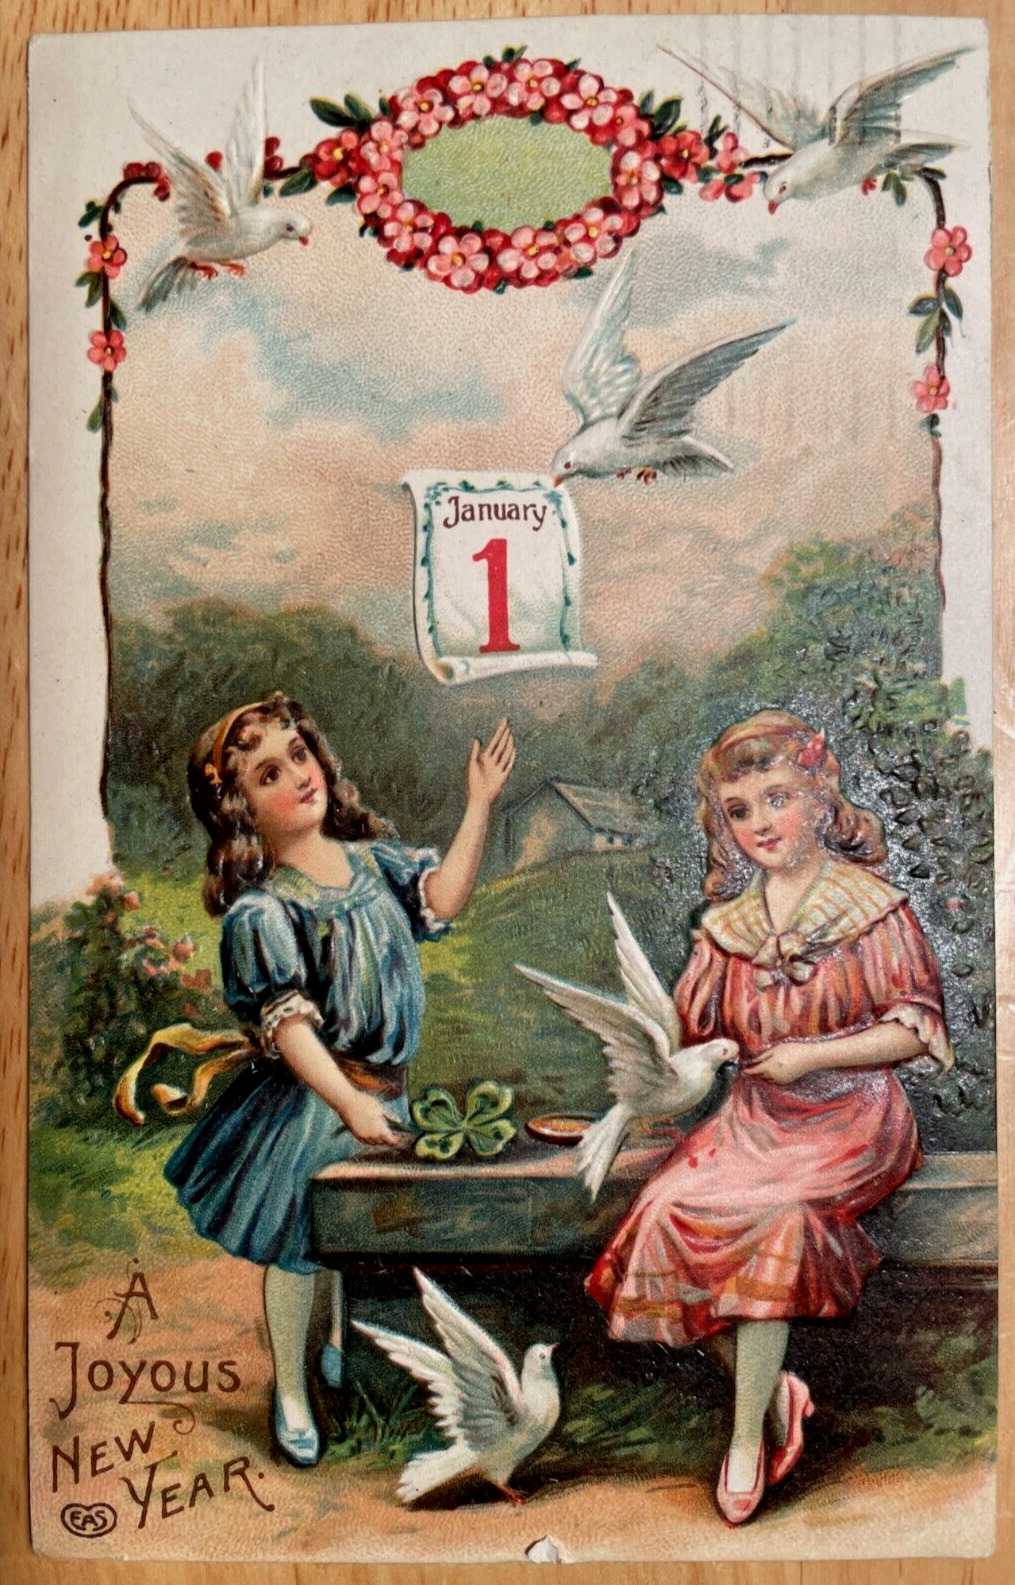 Vintage Victorian Postcard 1911 A Joyous New Year - Girls with Doves